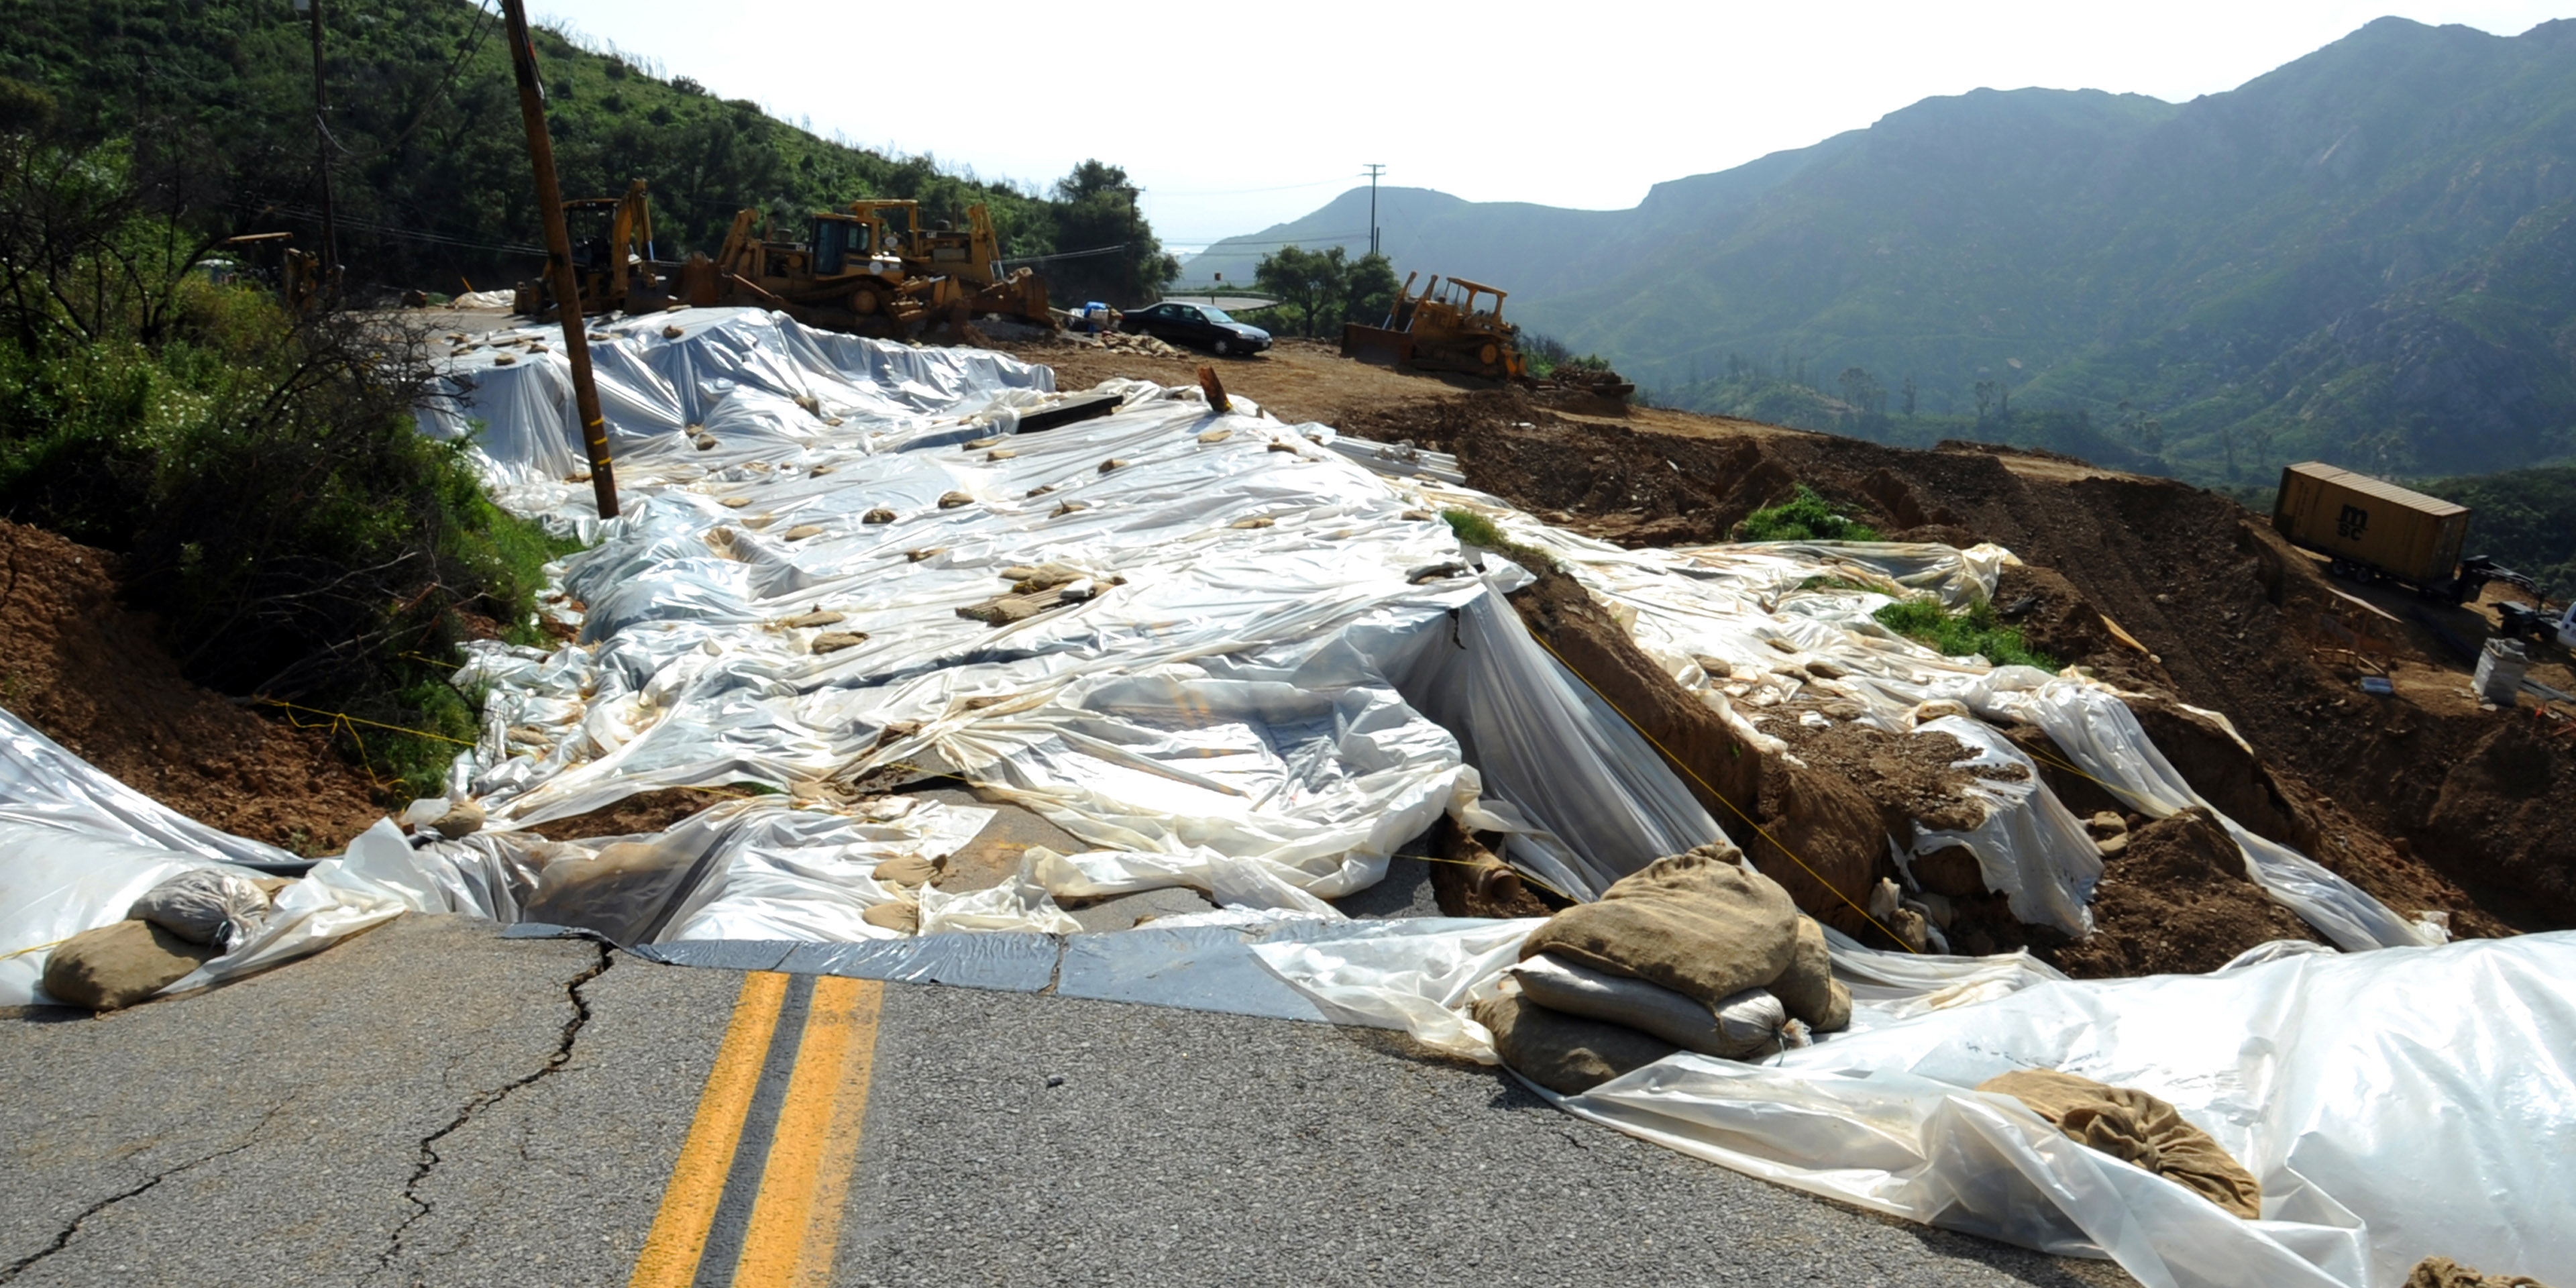 Hillside with a covering and various bulldozers and other heavy equipment after landslide on the hillside.